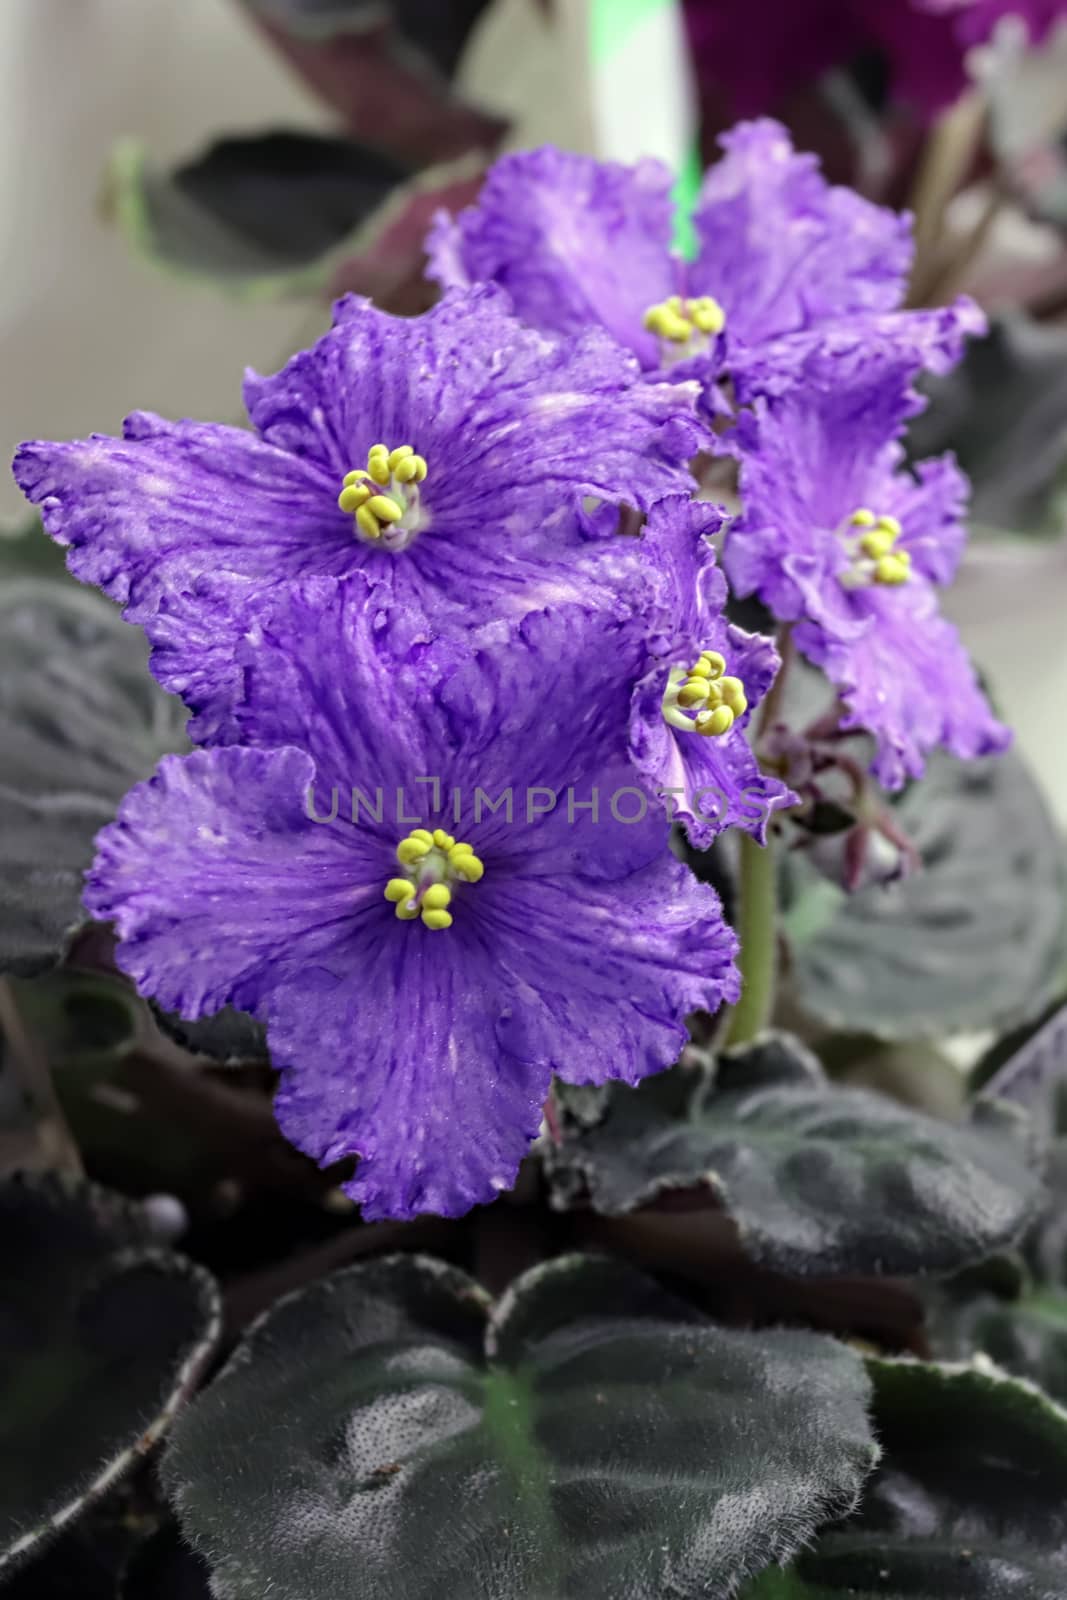 Beautiful Saintpaulia or Uzumbar violet. Violet indoor flowers close-up. Natural floral background for happy birthday, mother's day, women's day, anniversary, wedding invitation